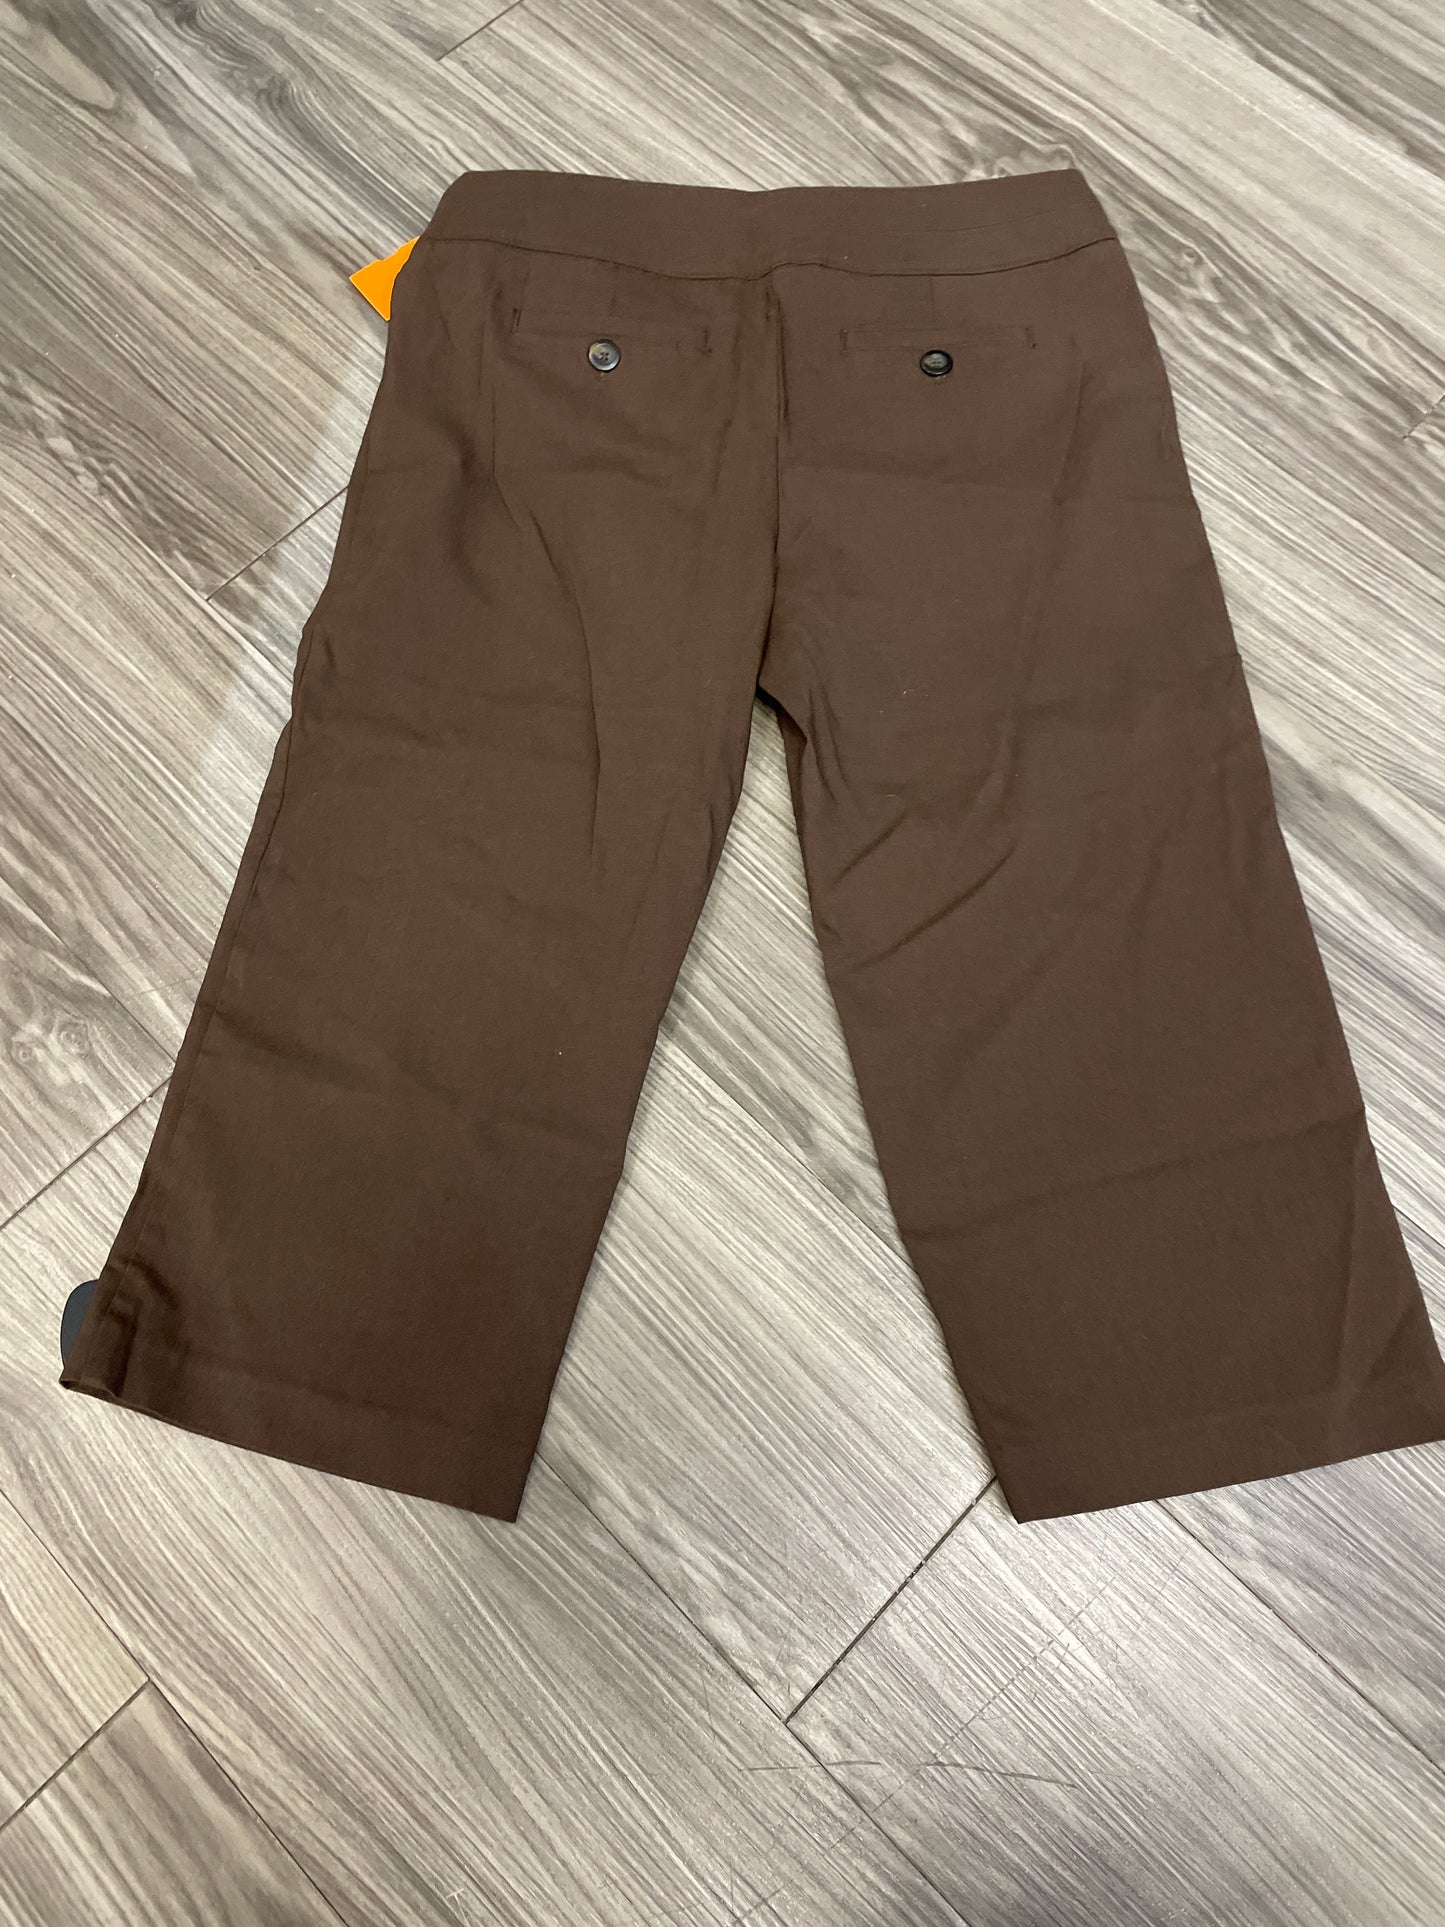 Capris By Nine And Company  Size: 8